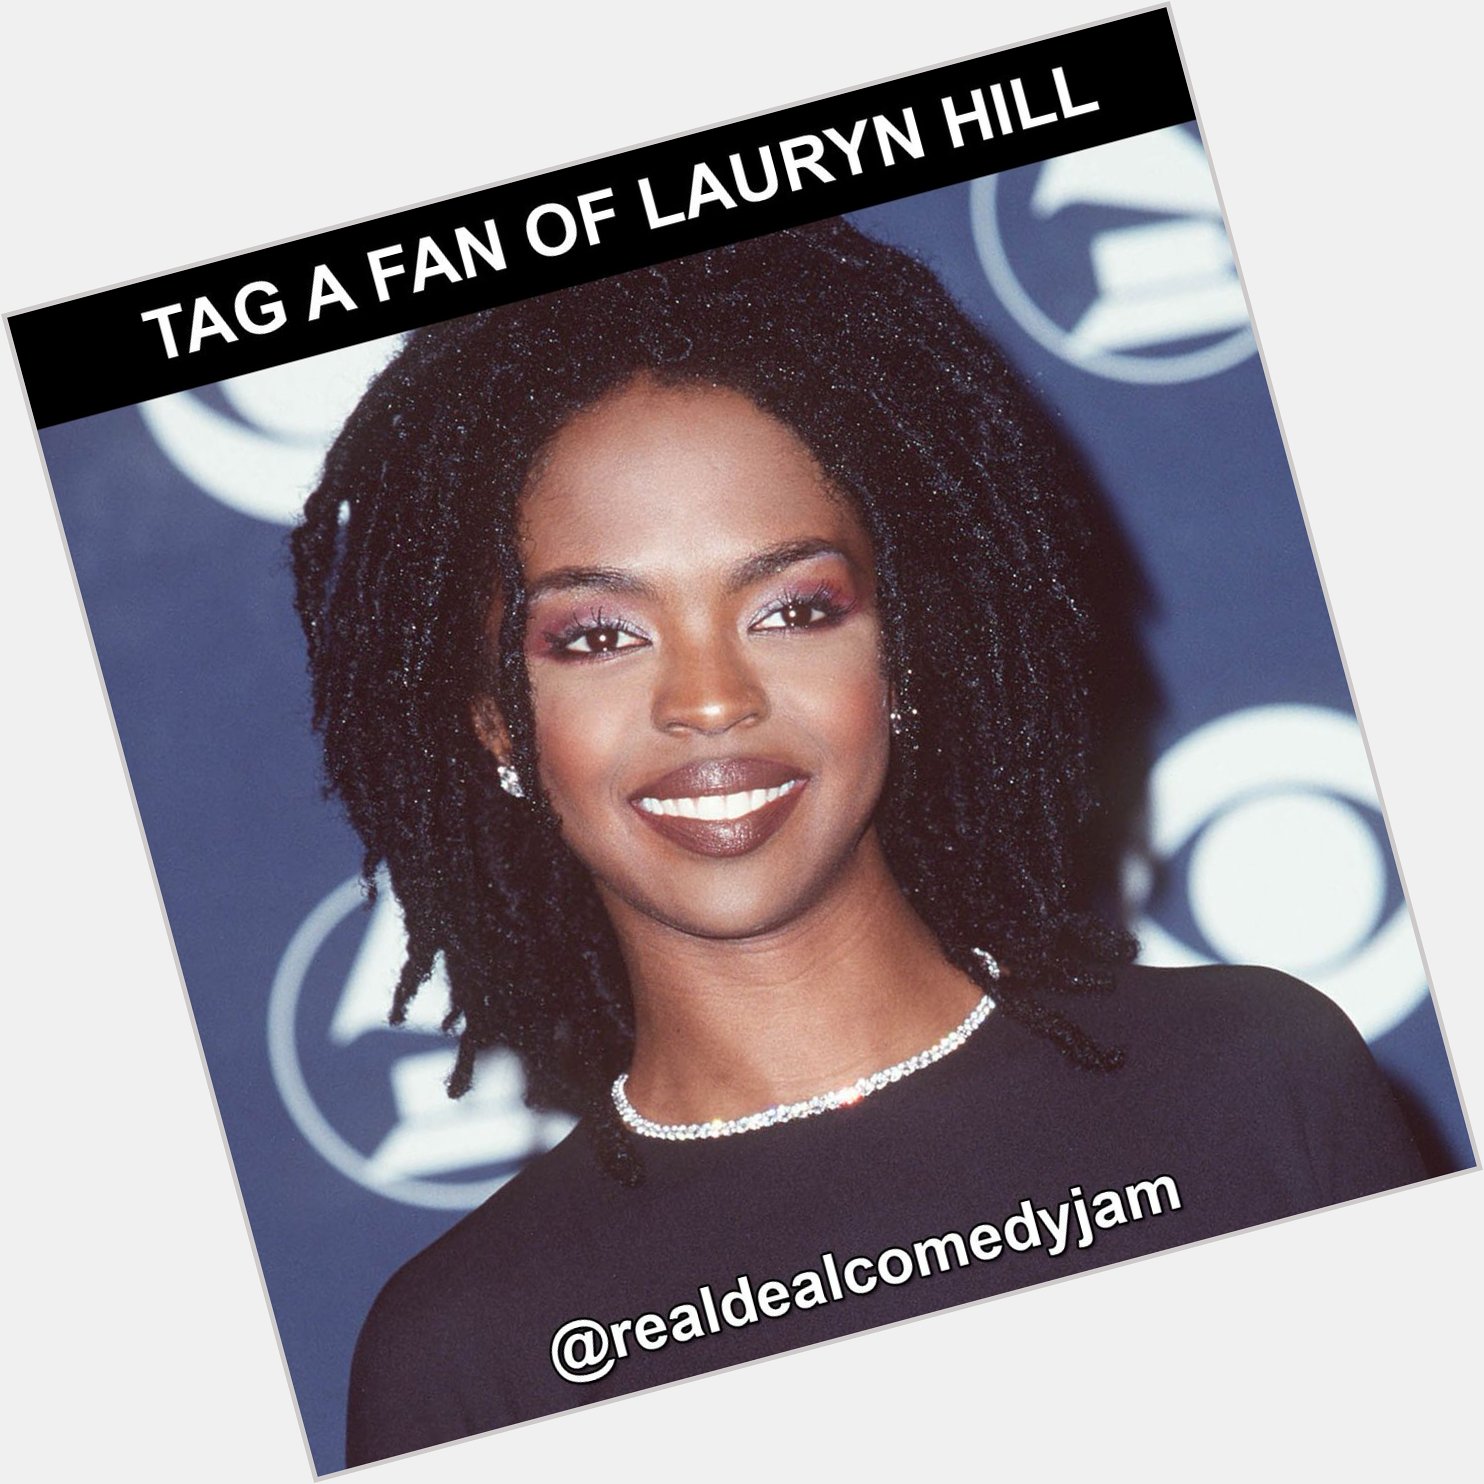 SMILE! Happy Birthday to the iconic Lauryn Hill who turns 43 today. Living legend.  